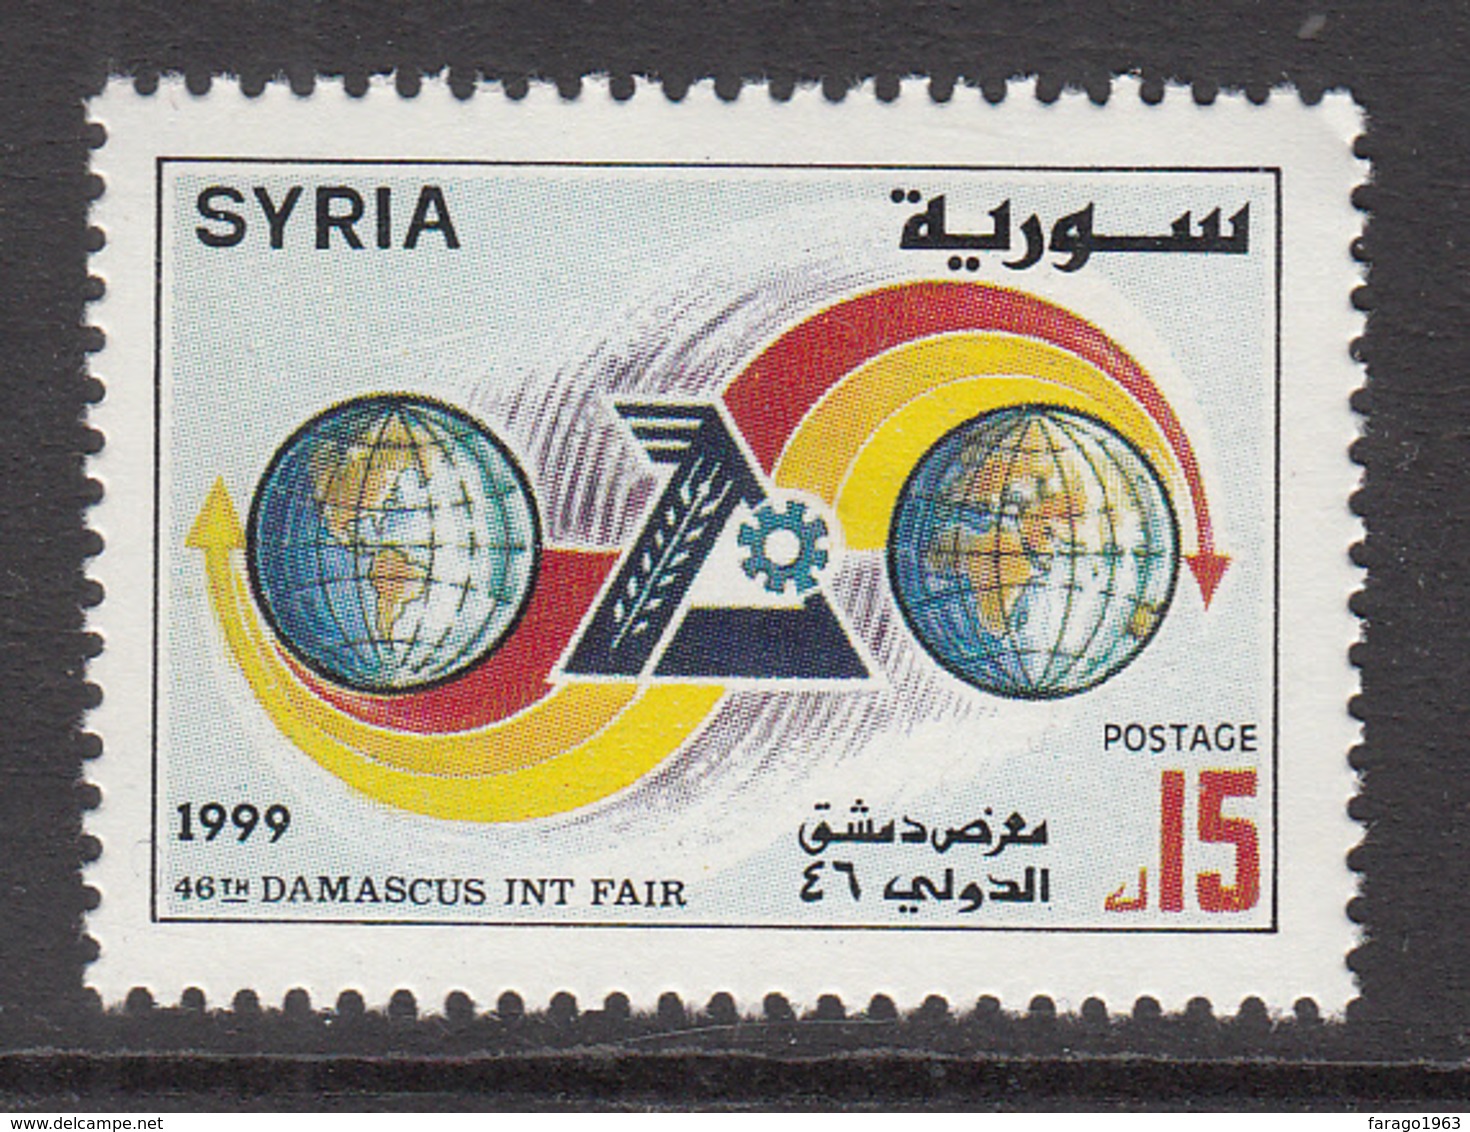 1999 Syria Damascus Intl Day Emblem Between Two Globes With Arrows Set Of 1 MNH - Syrie